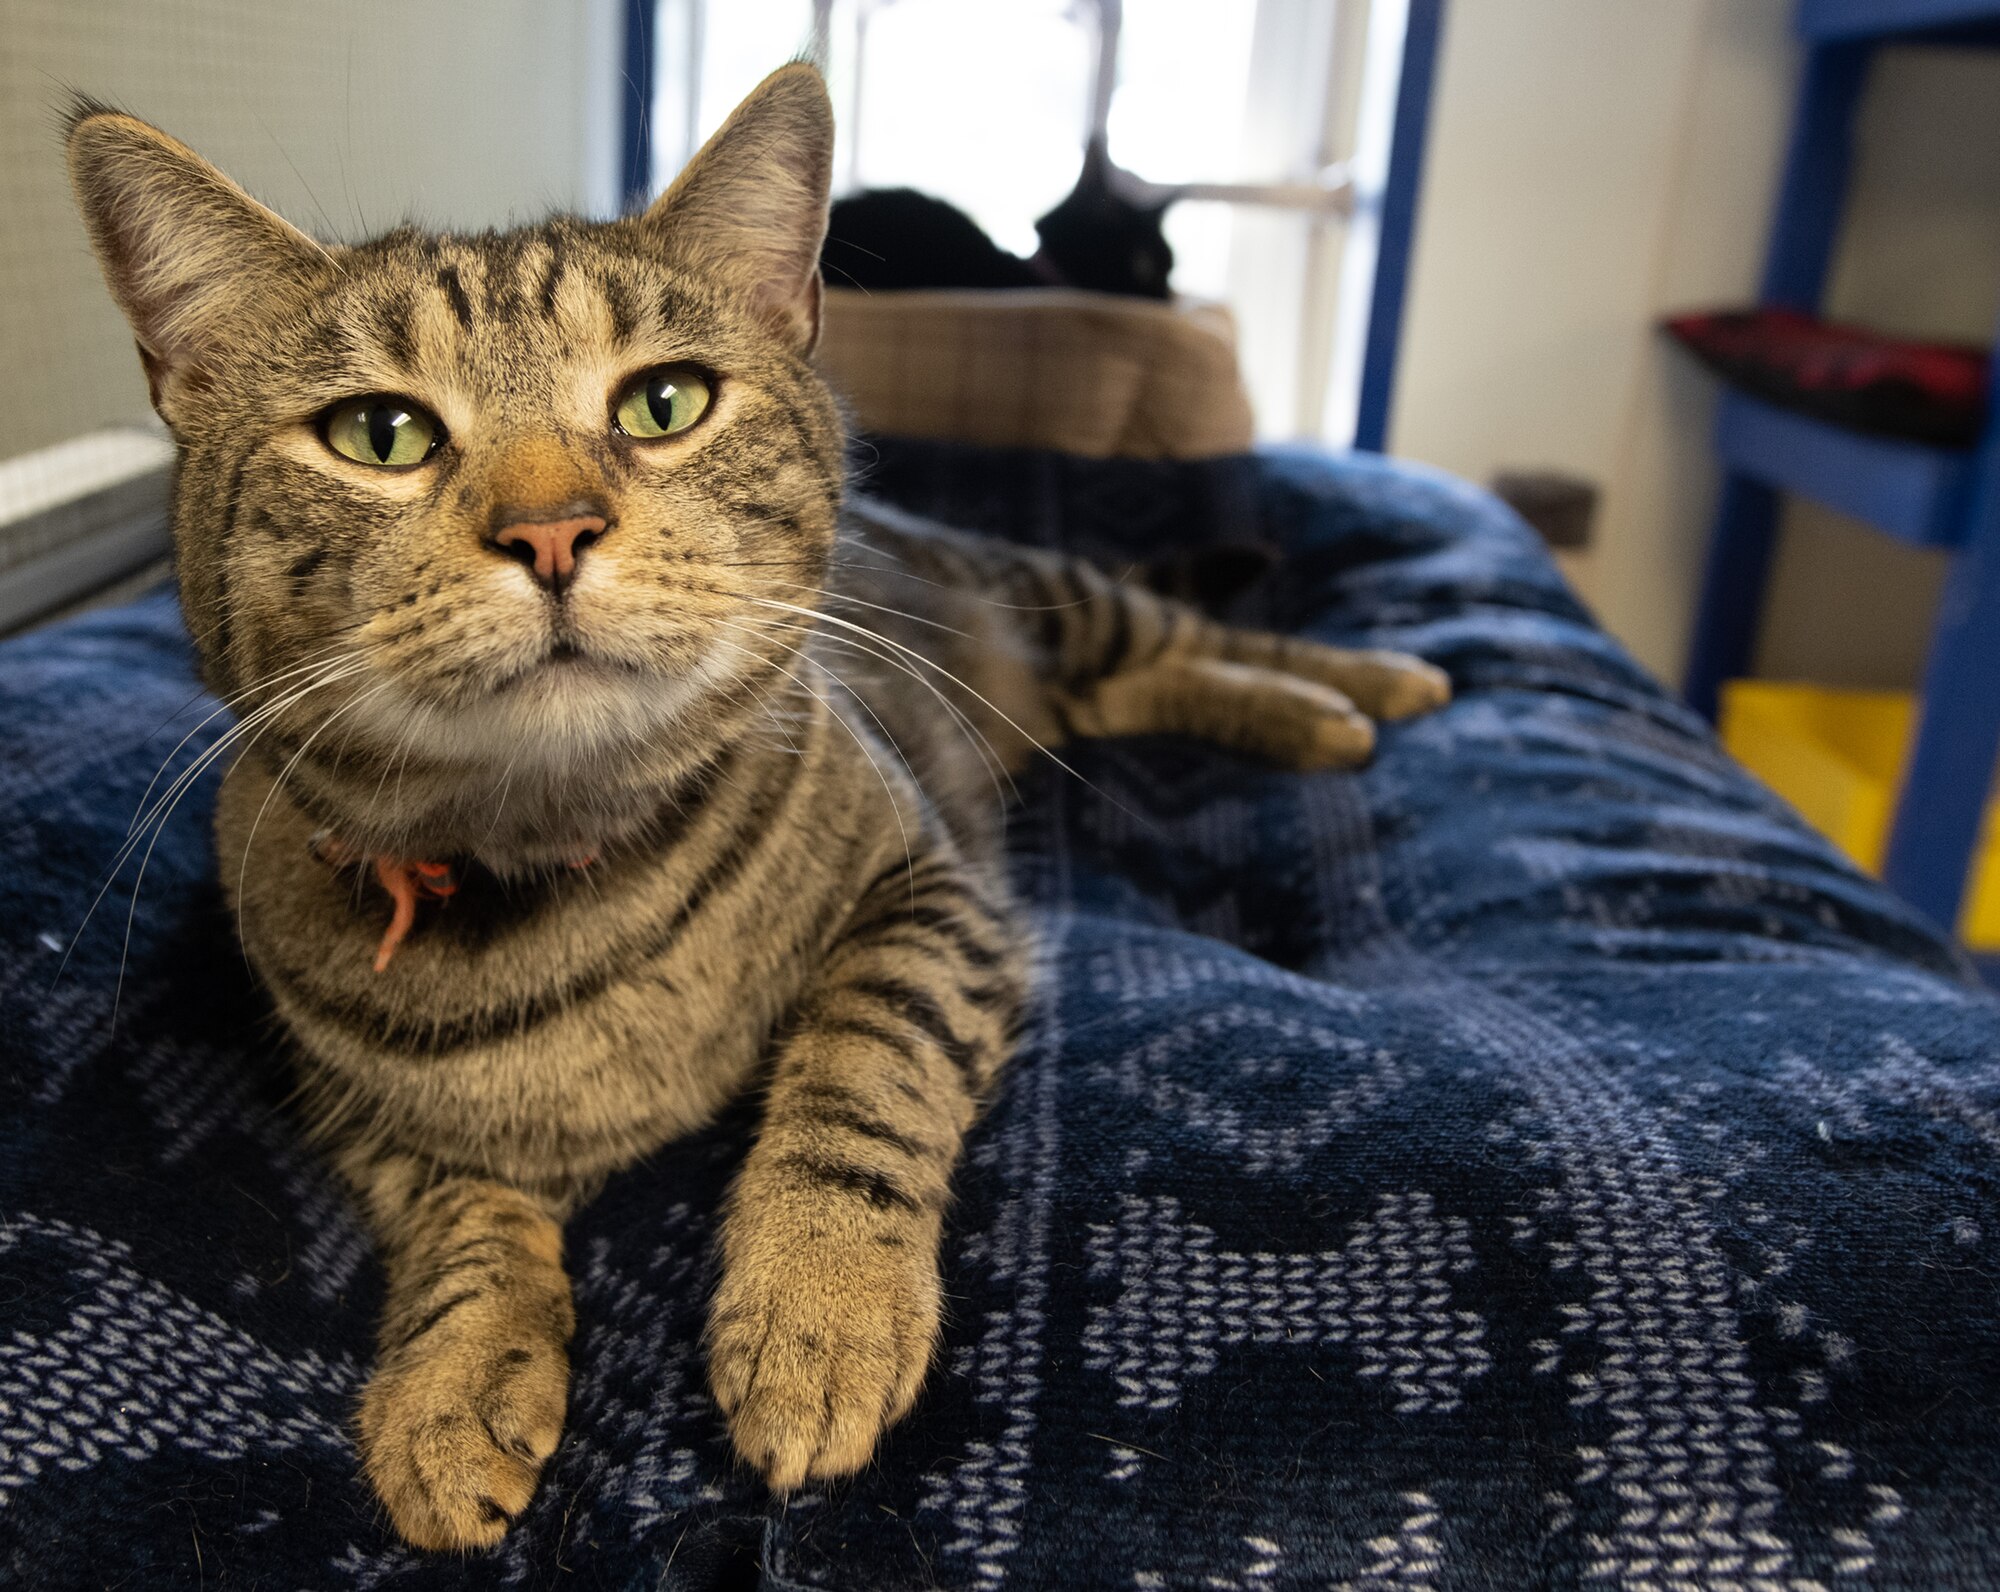 A tabby cat looks up at the viewer while laying comfortably on a blue pattern cushion.